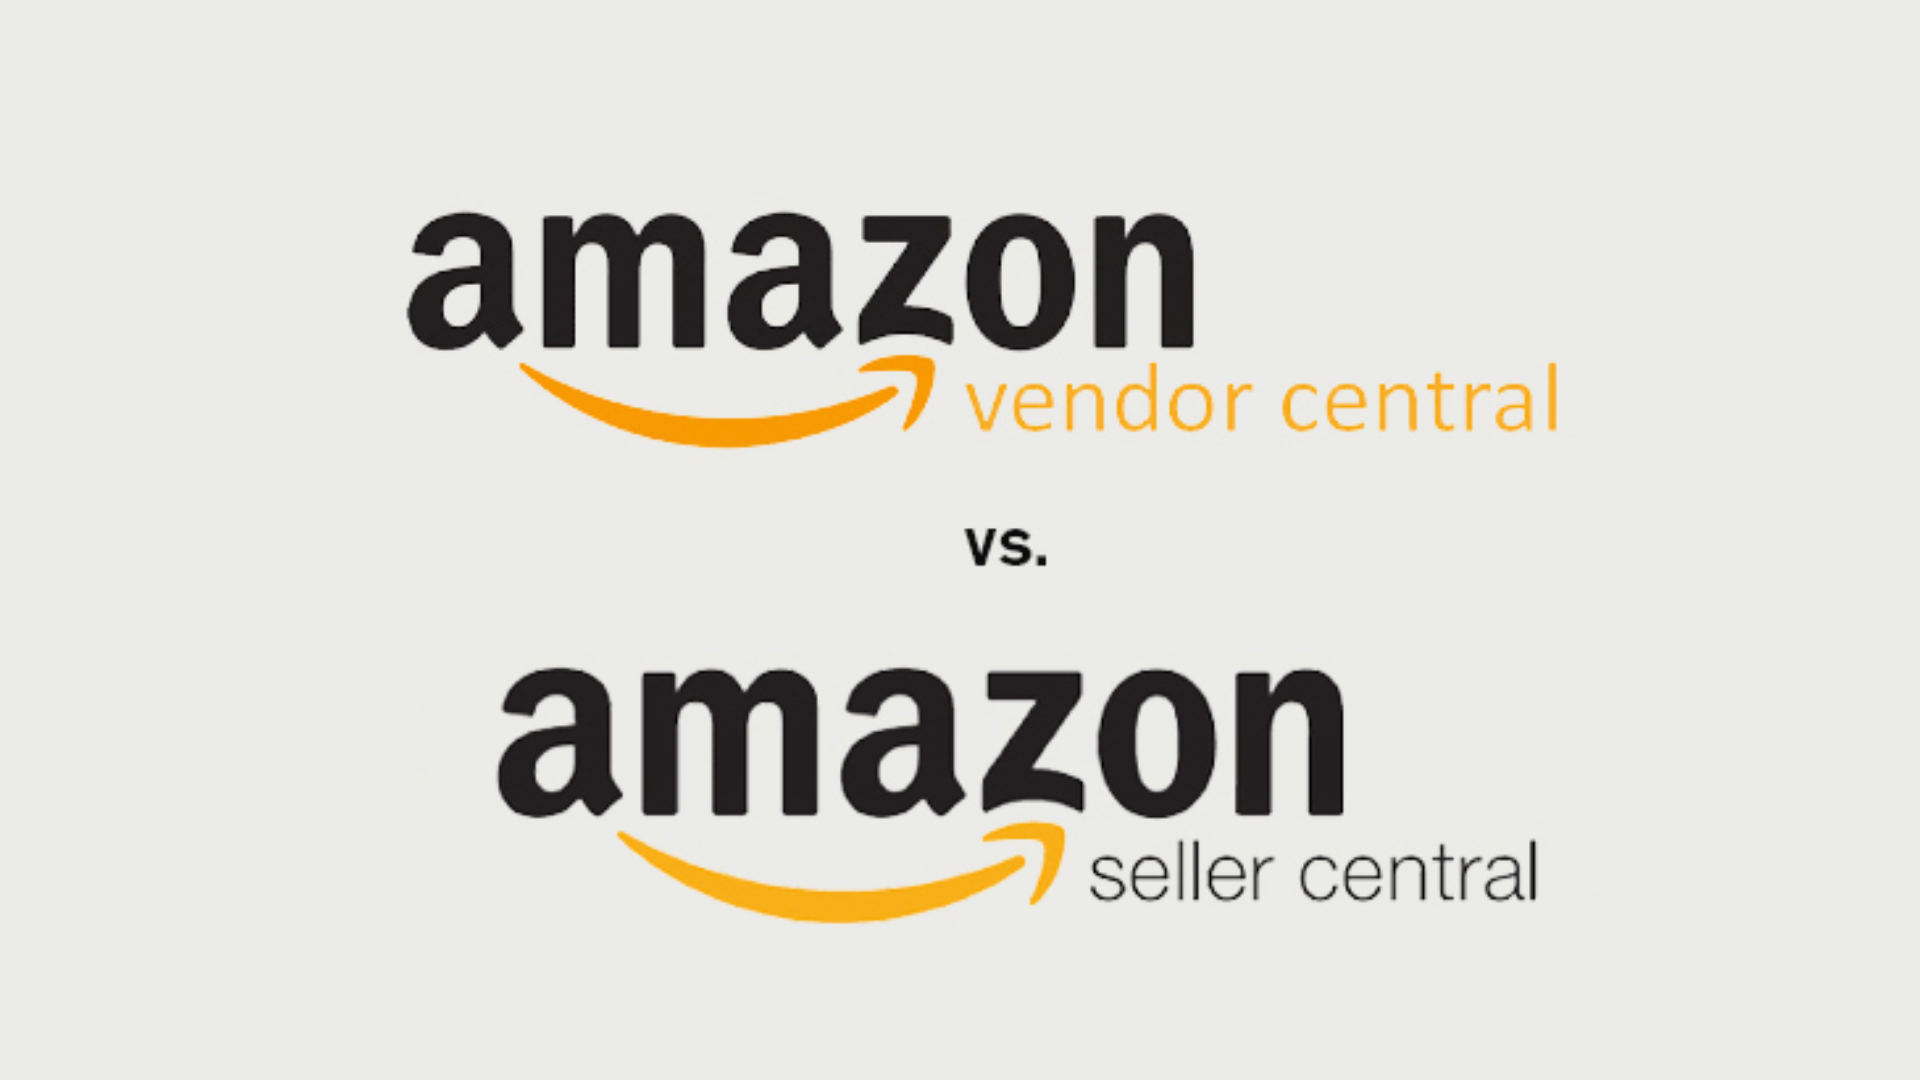 Title Photo for Blog Article comparing Amazon Vendor Central and Amazon Seller Central